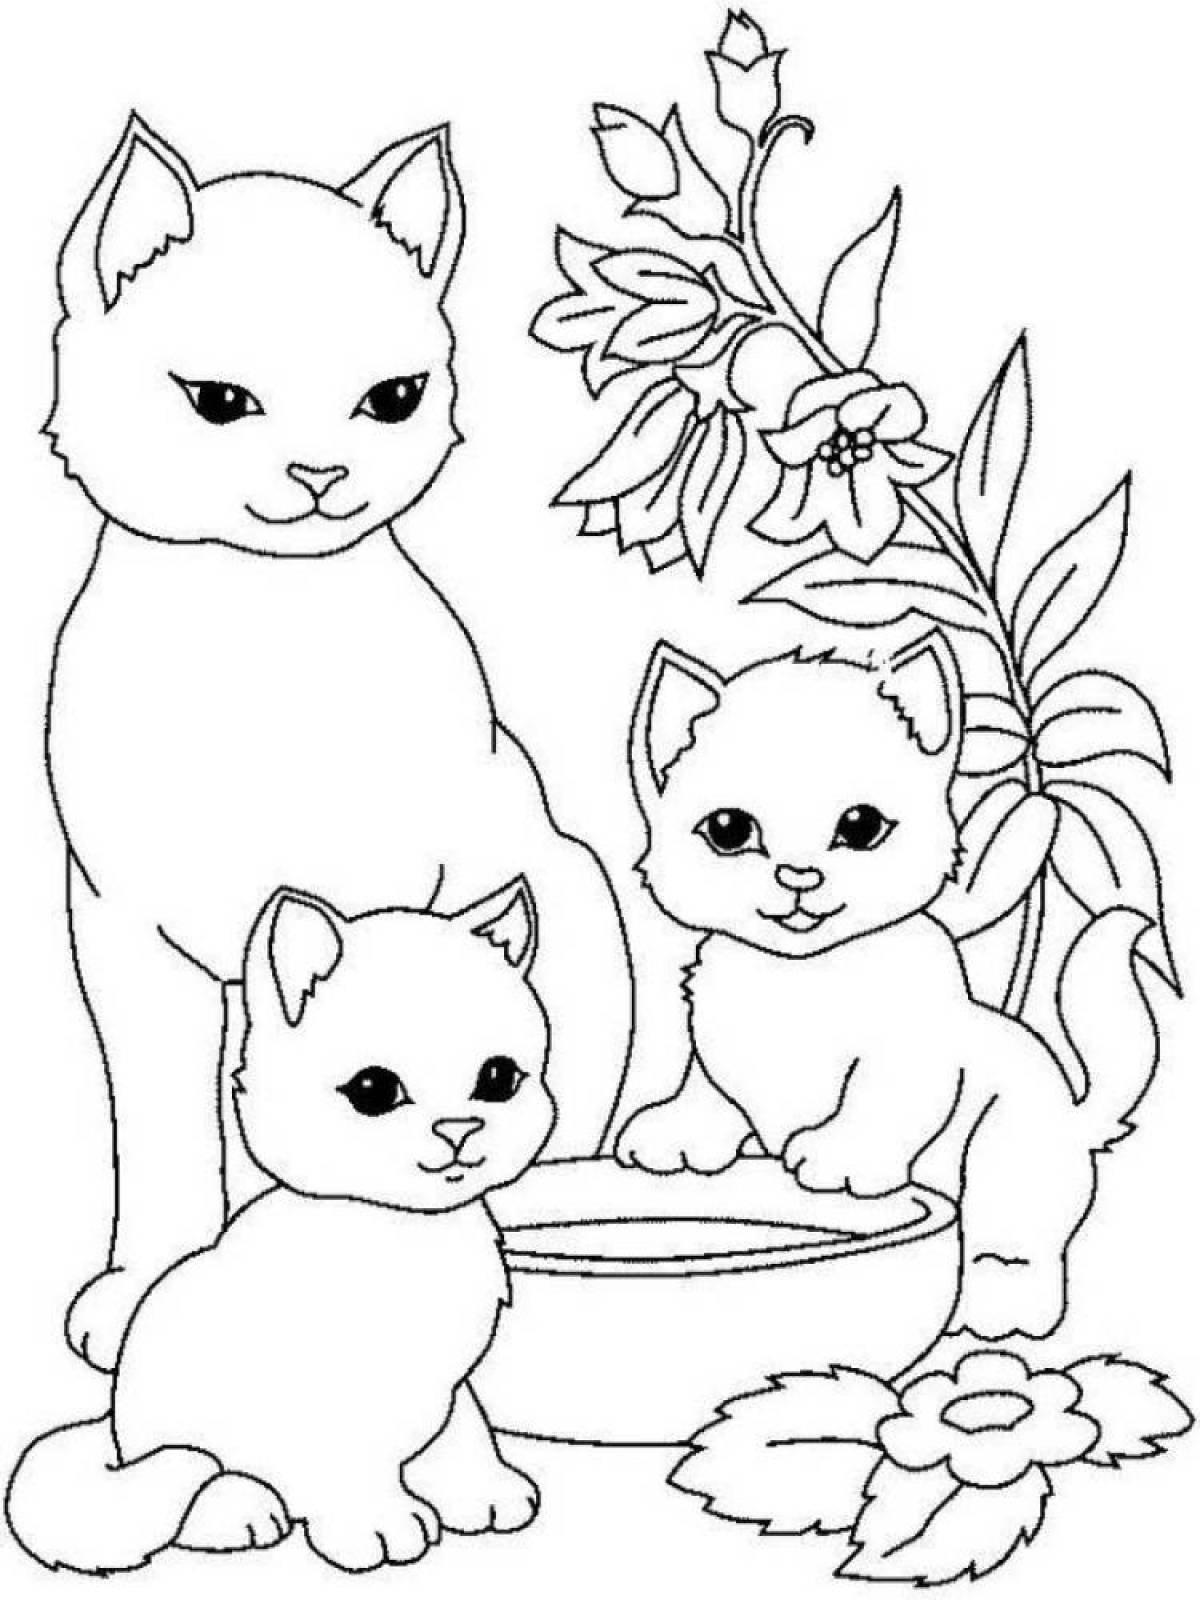 Playful coloring cat for children 6-7 years old